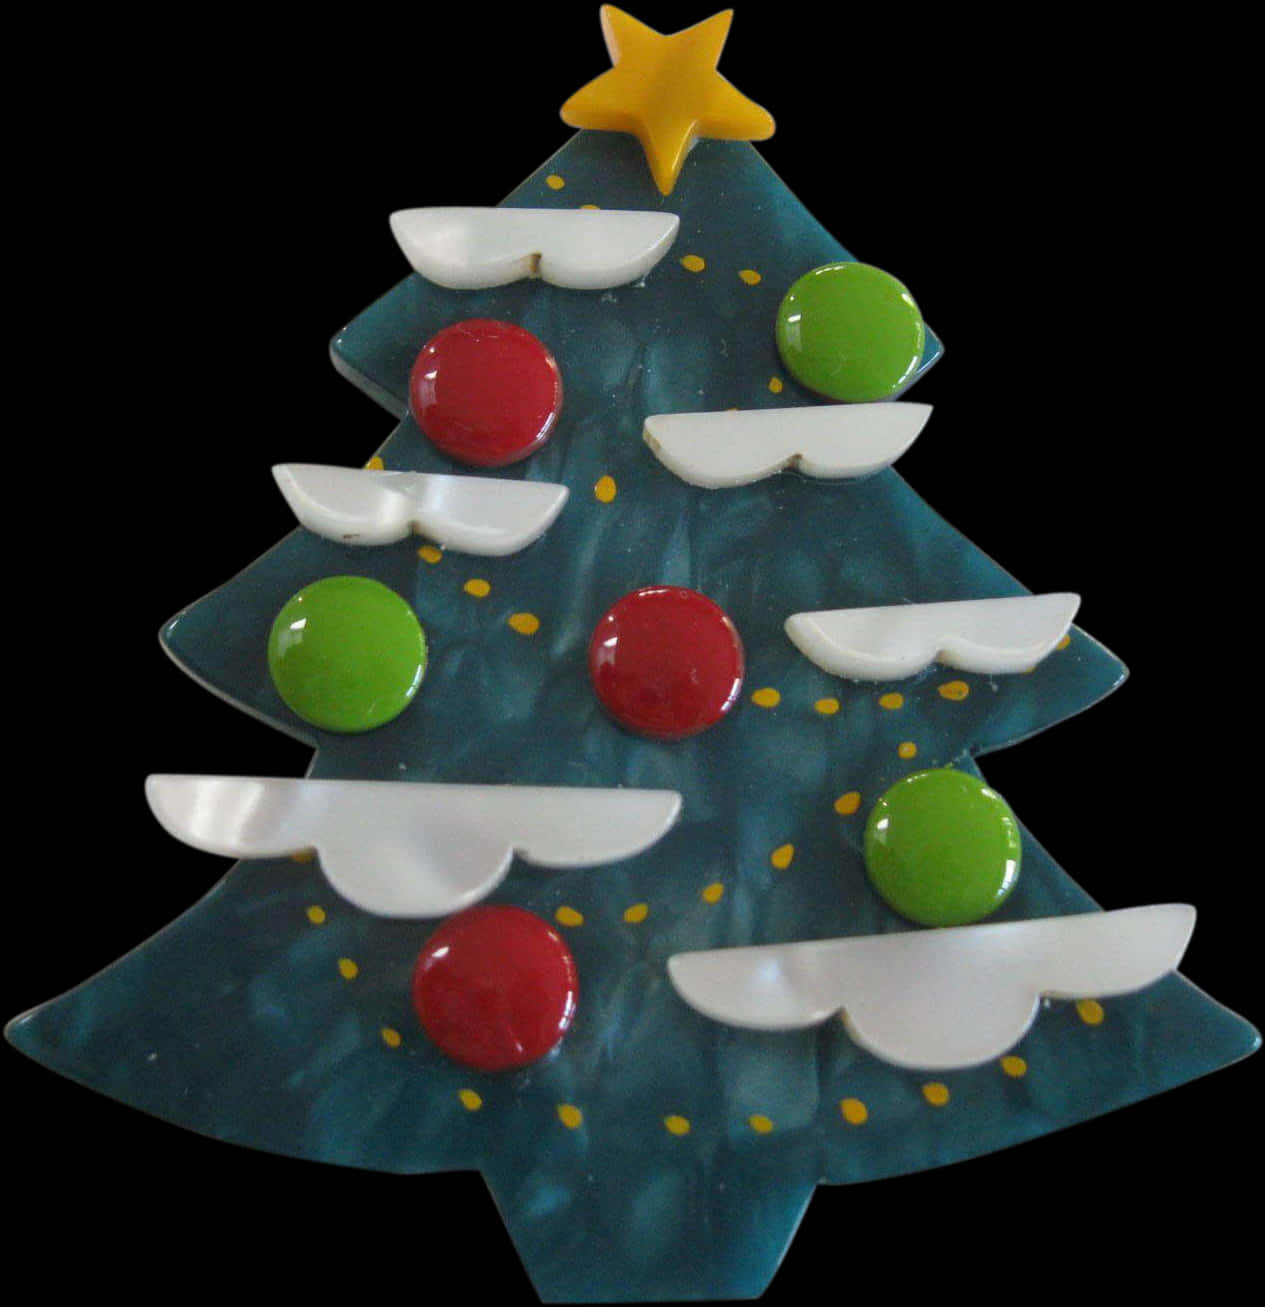 A Blue Christmas Tree With White And Red Circles And White Stars